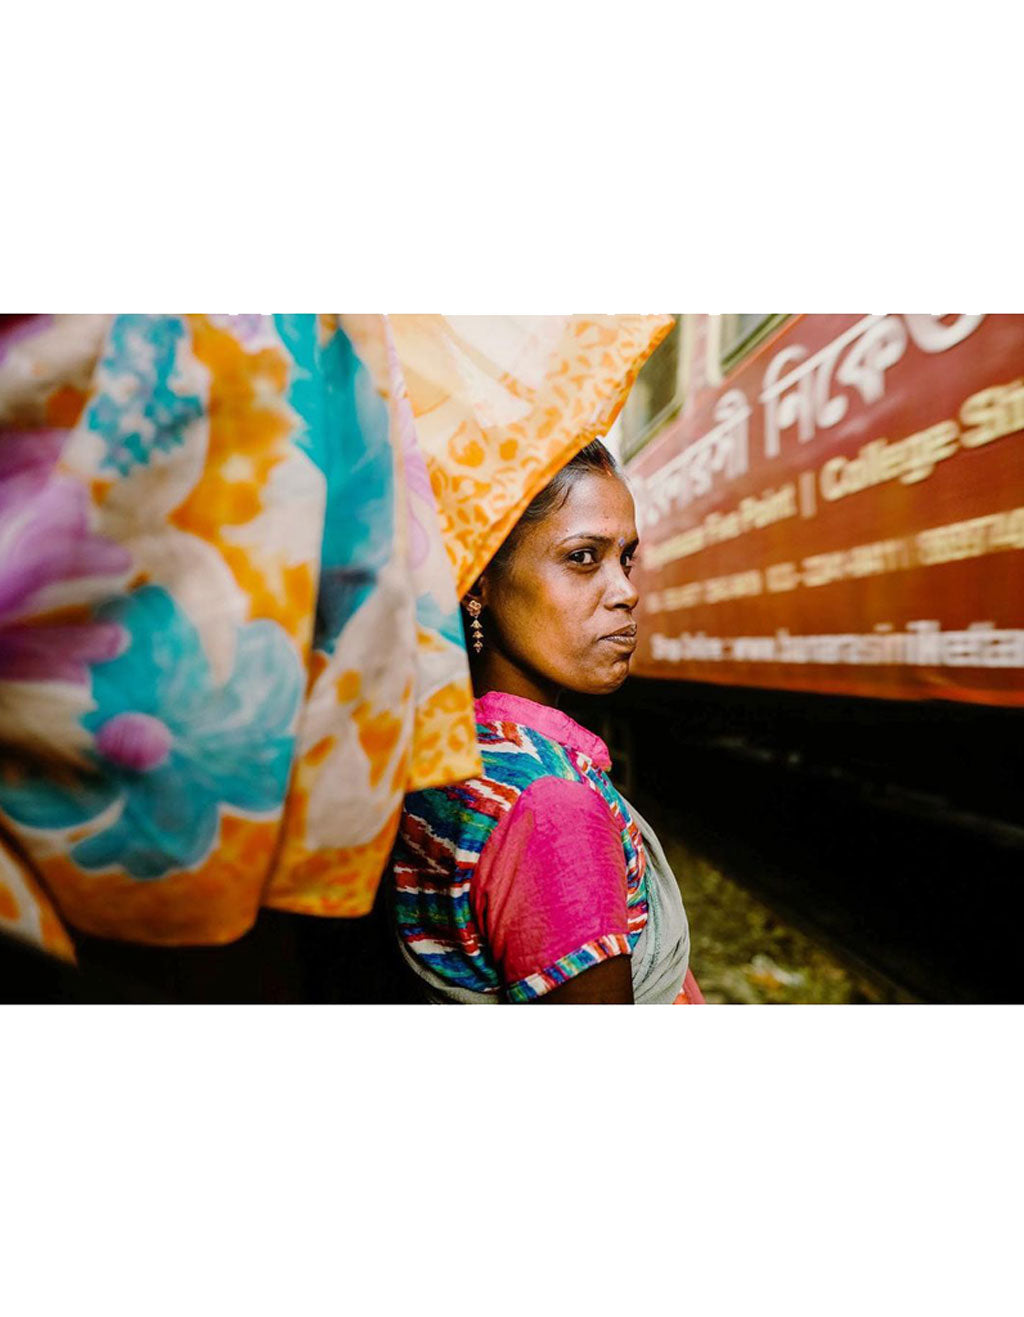 A woman in colorful dress waits for the train in Kolkata India.